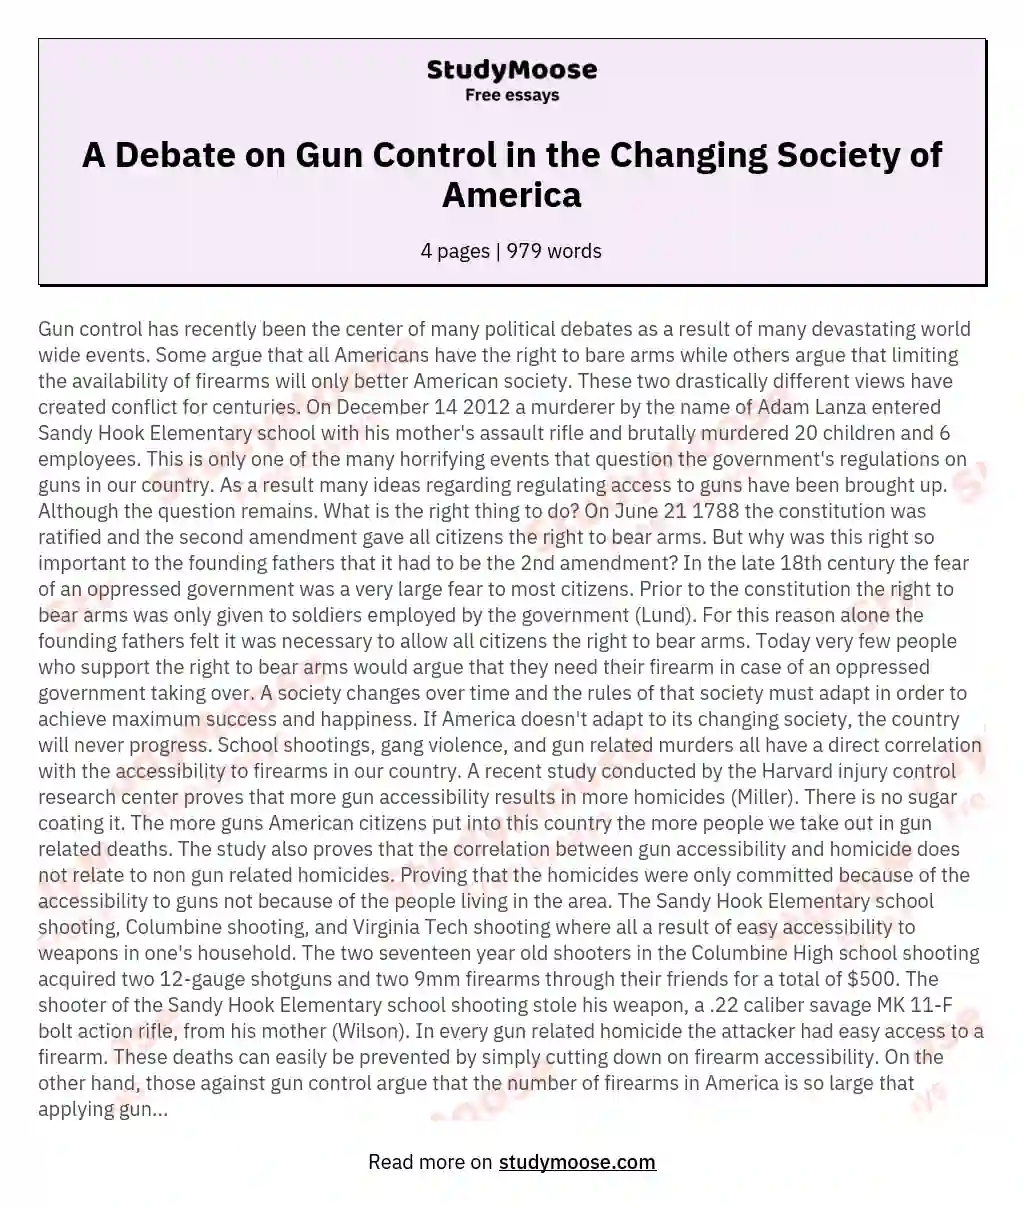 A Debate on Gun Control in the Changing Society of America essay